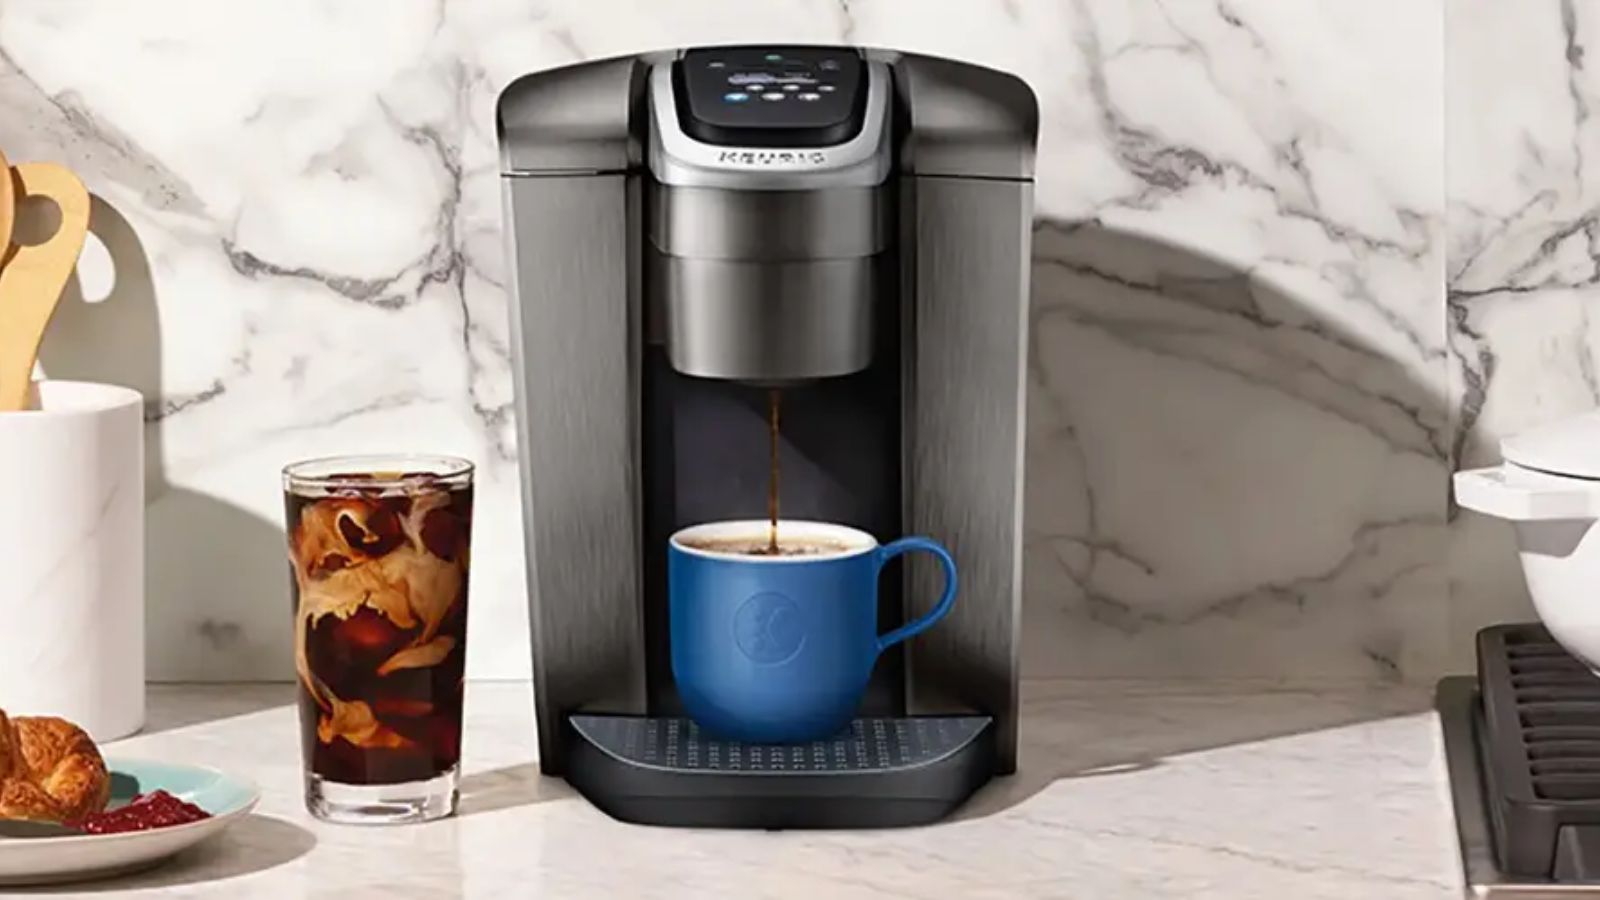 Keurig is offering an exclusive $100 off their BEST coffee maker this Black  Friday - don't miss out!